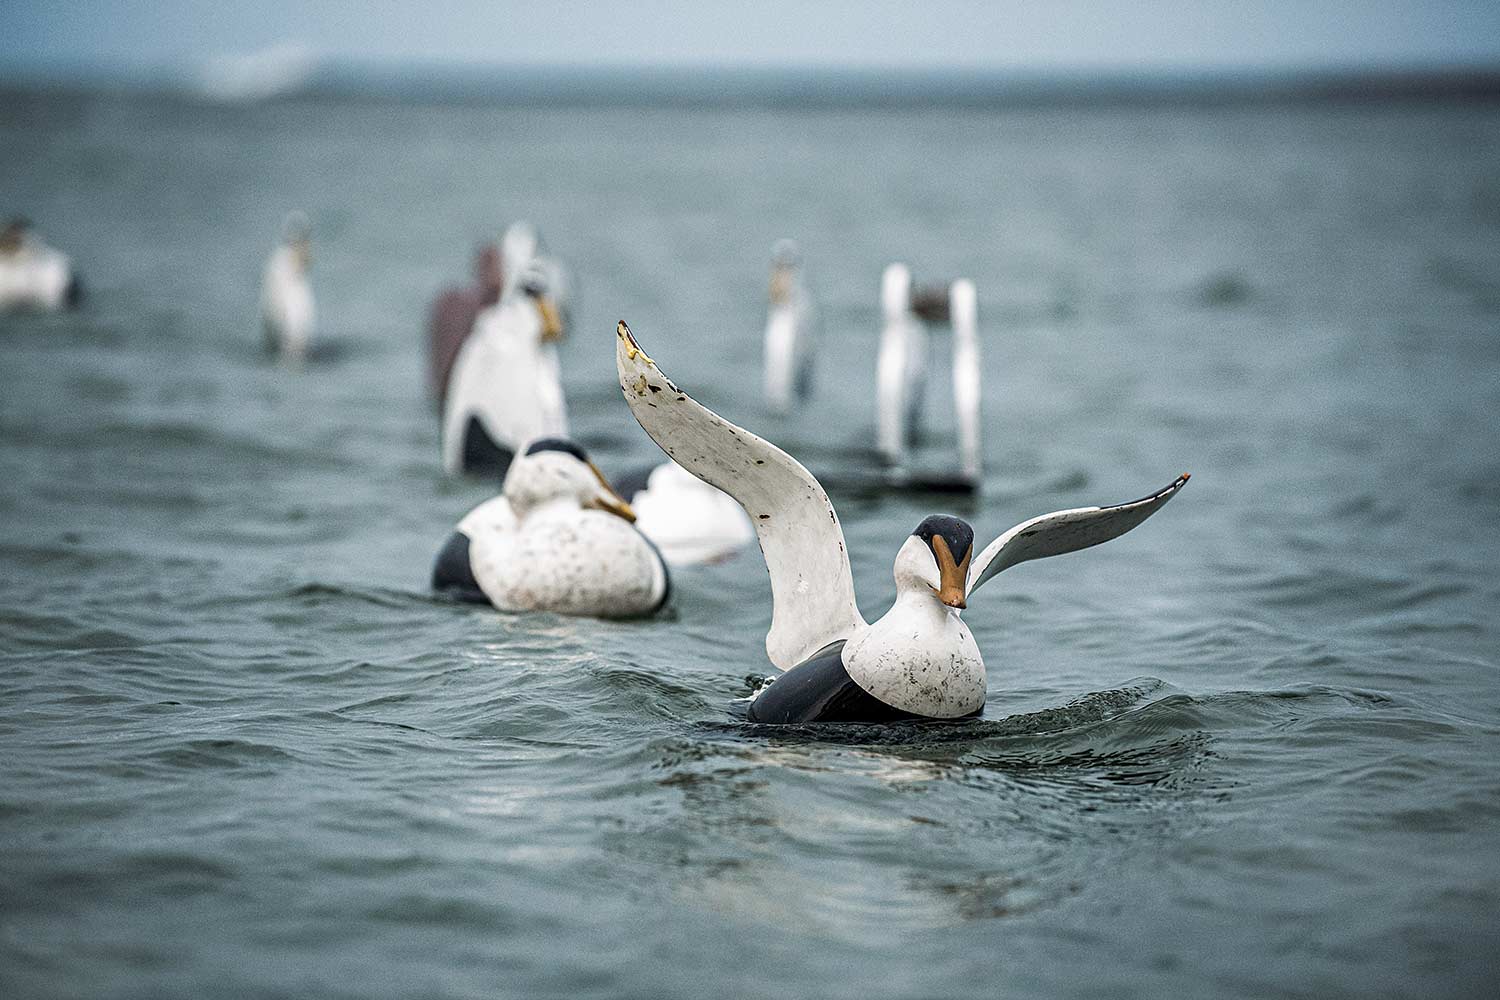 Traditional sea duck decoys in the water.